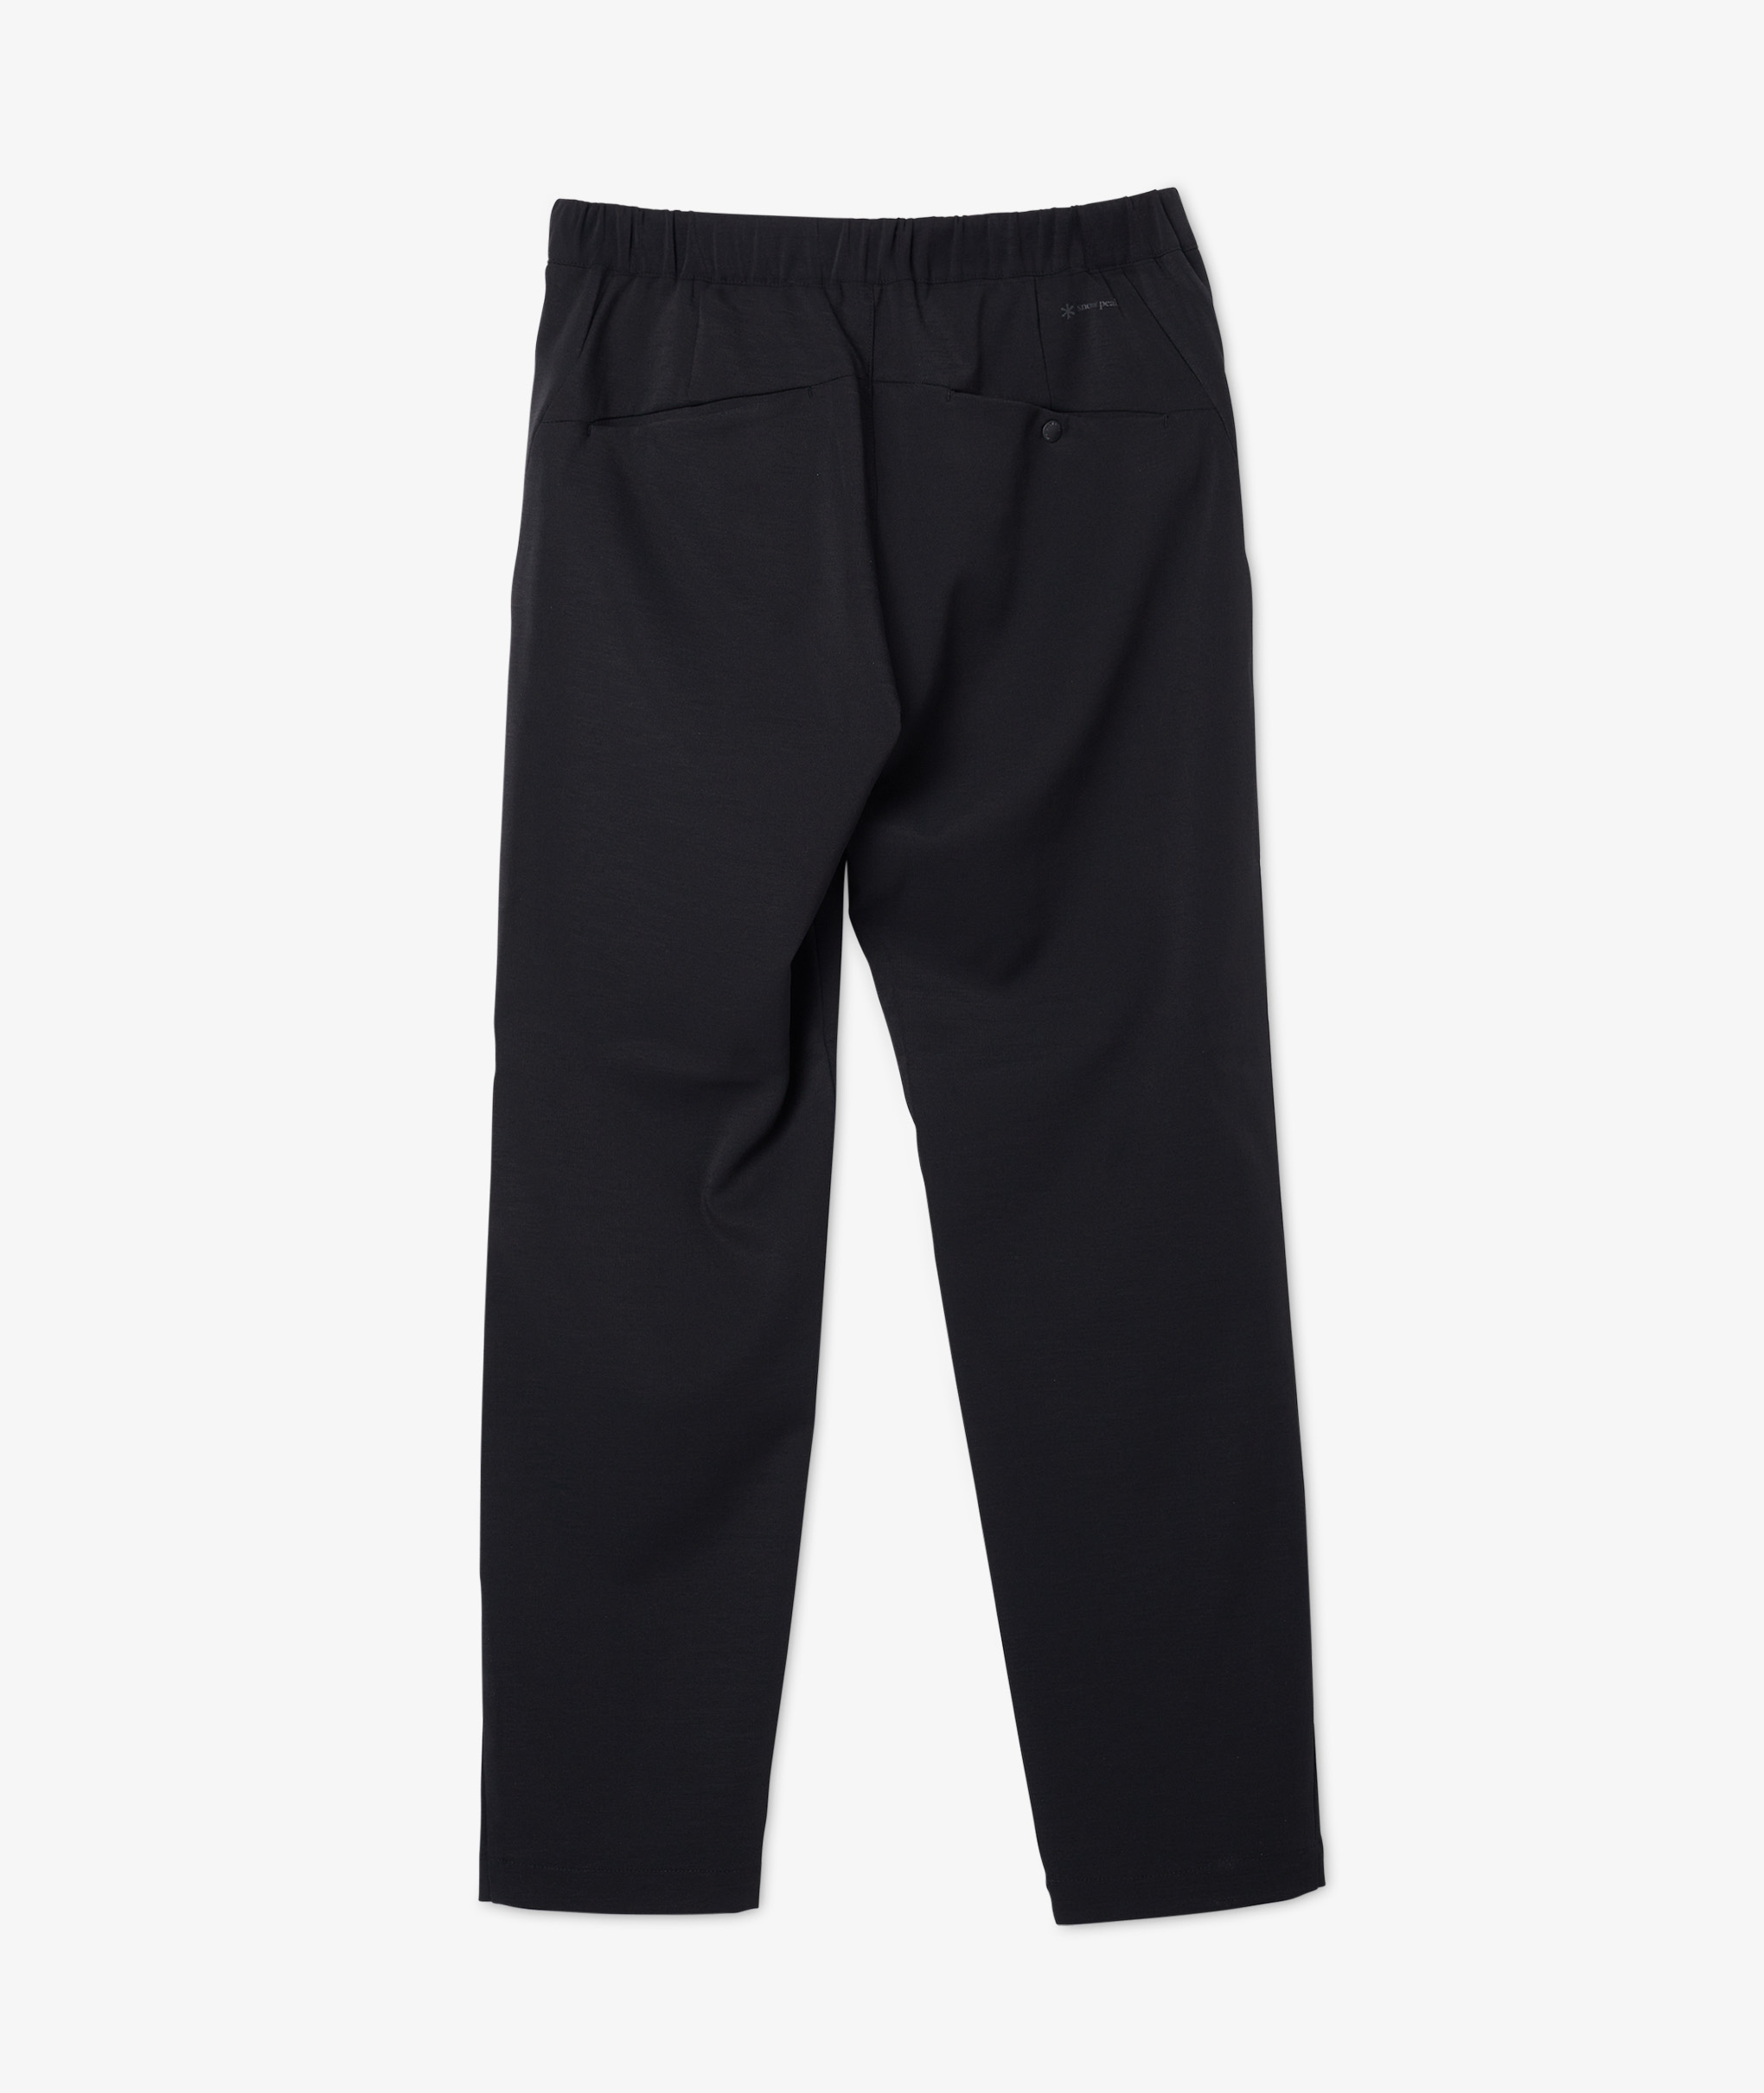 Norse Store | Shipping Worldwide - Snow Peak Active Comfort Pants